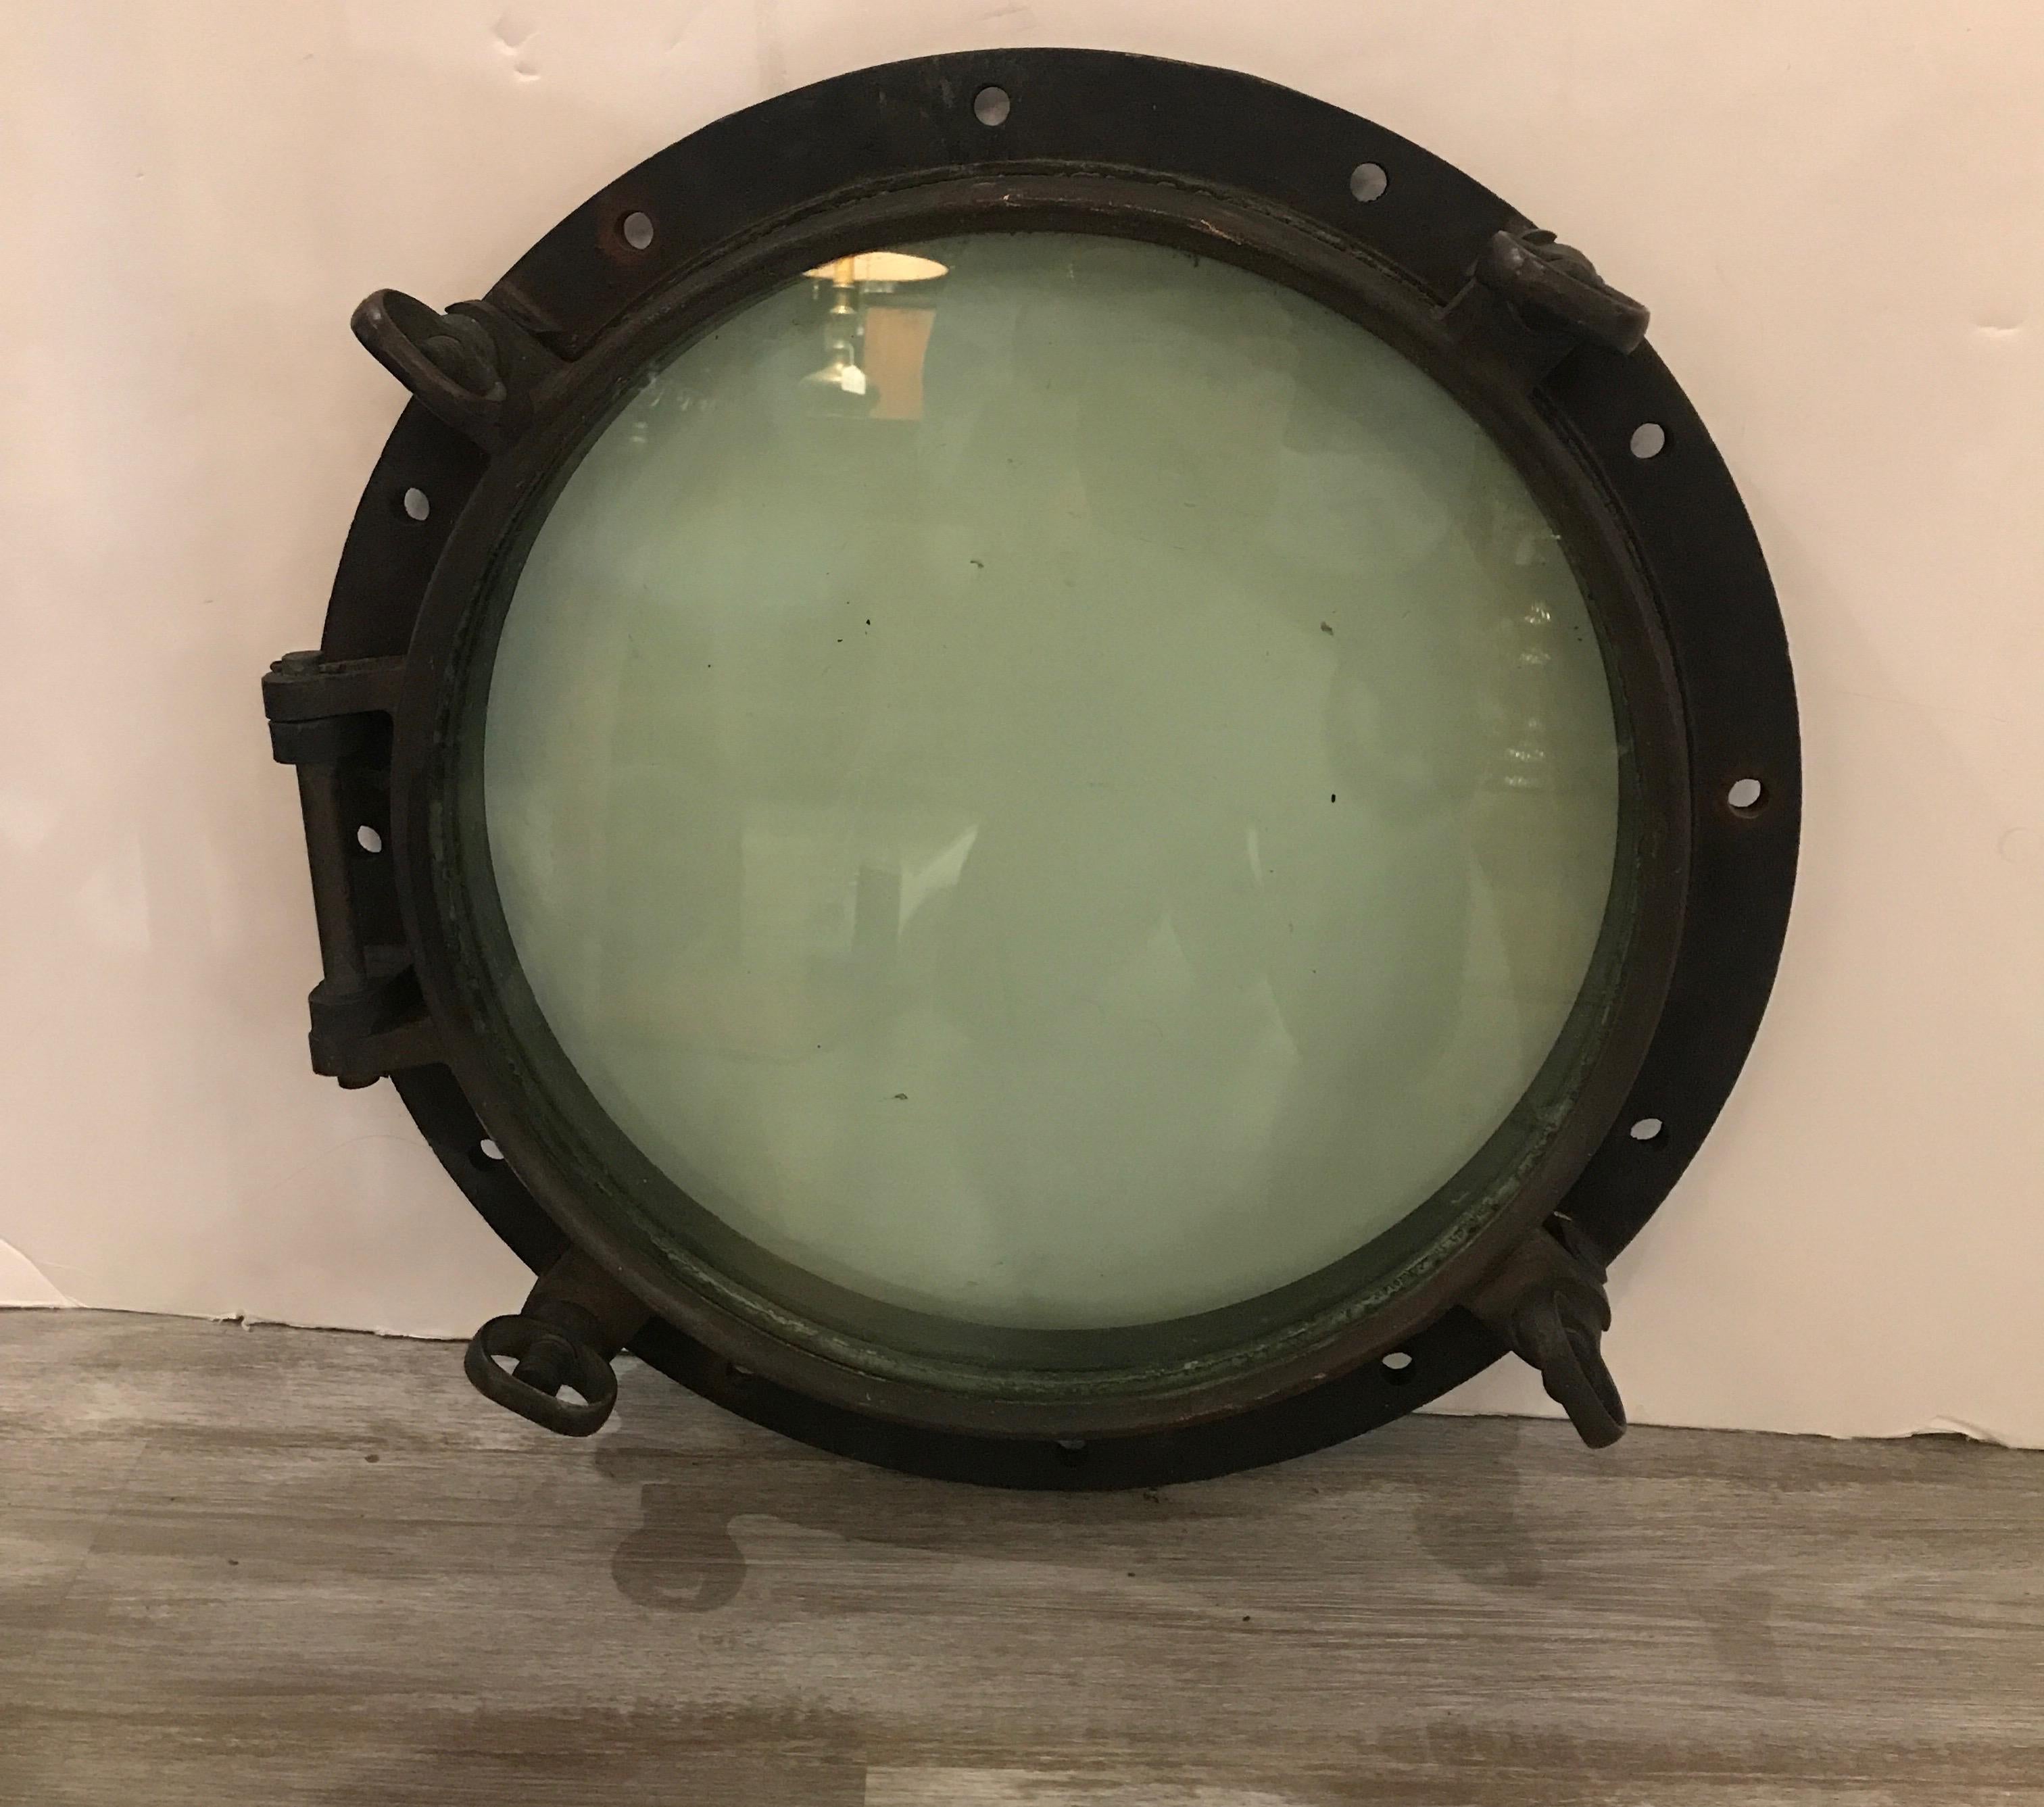 Original condition, large bronze and glass porthole from a turn of the century vessel. 23 inches in diameter, solid cast bronze with original weathered patination. The porthole is in working condition.